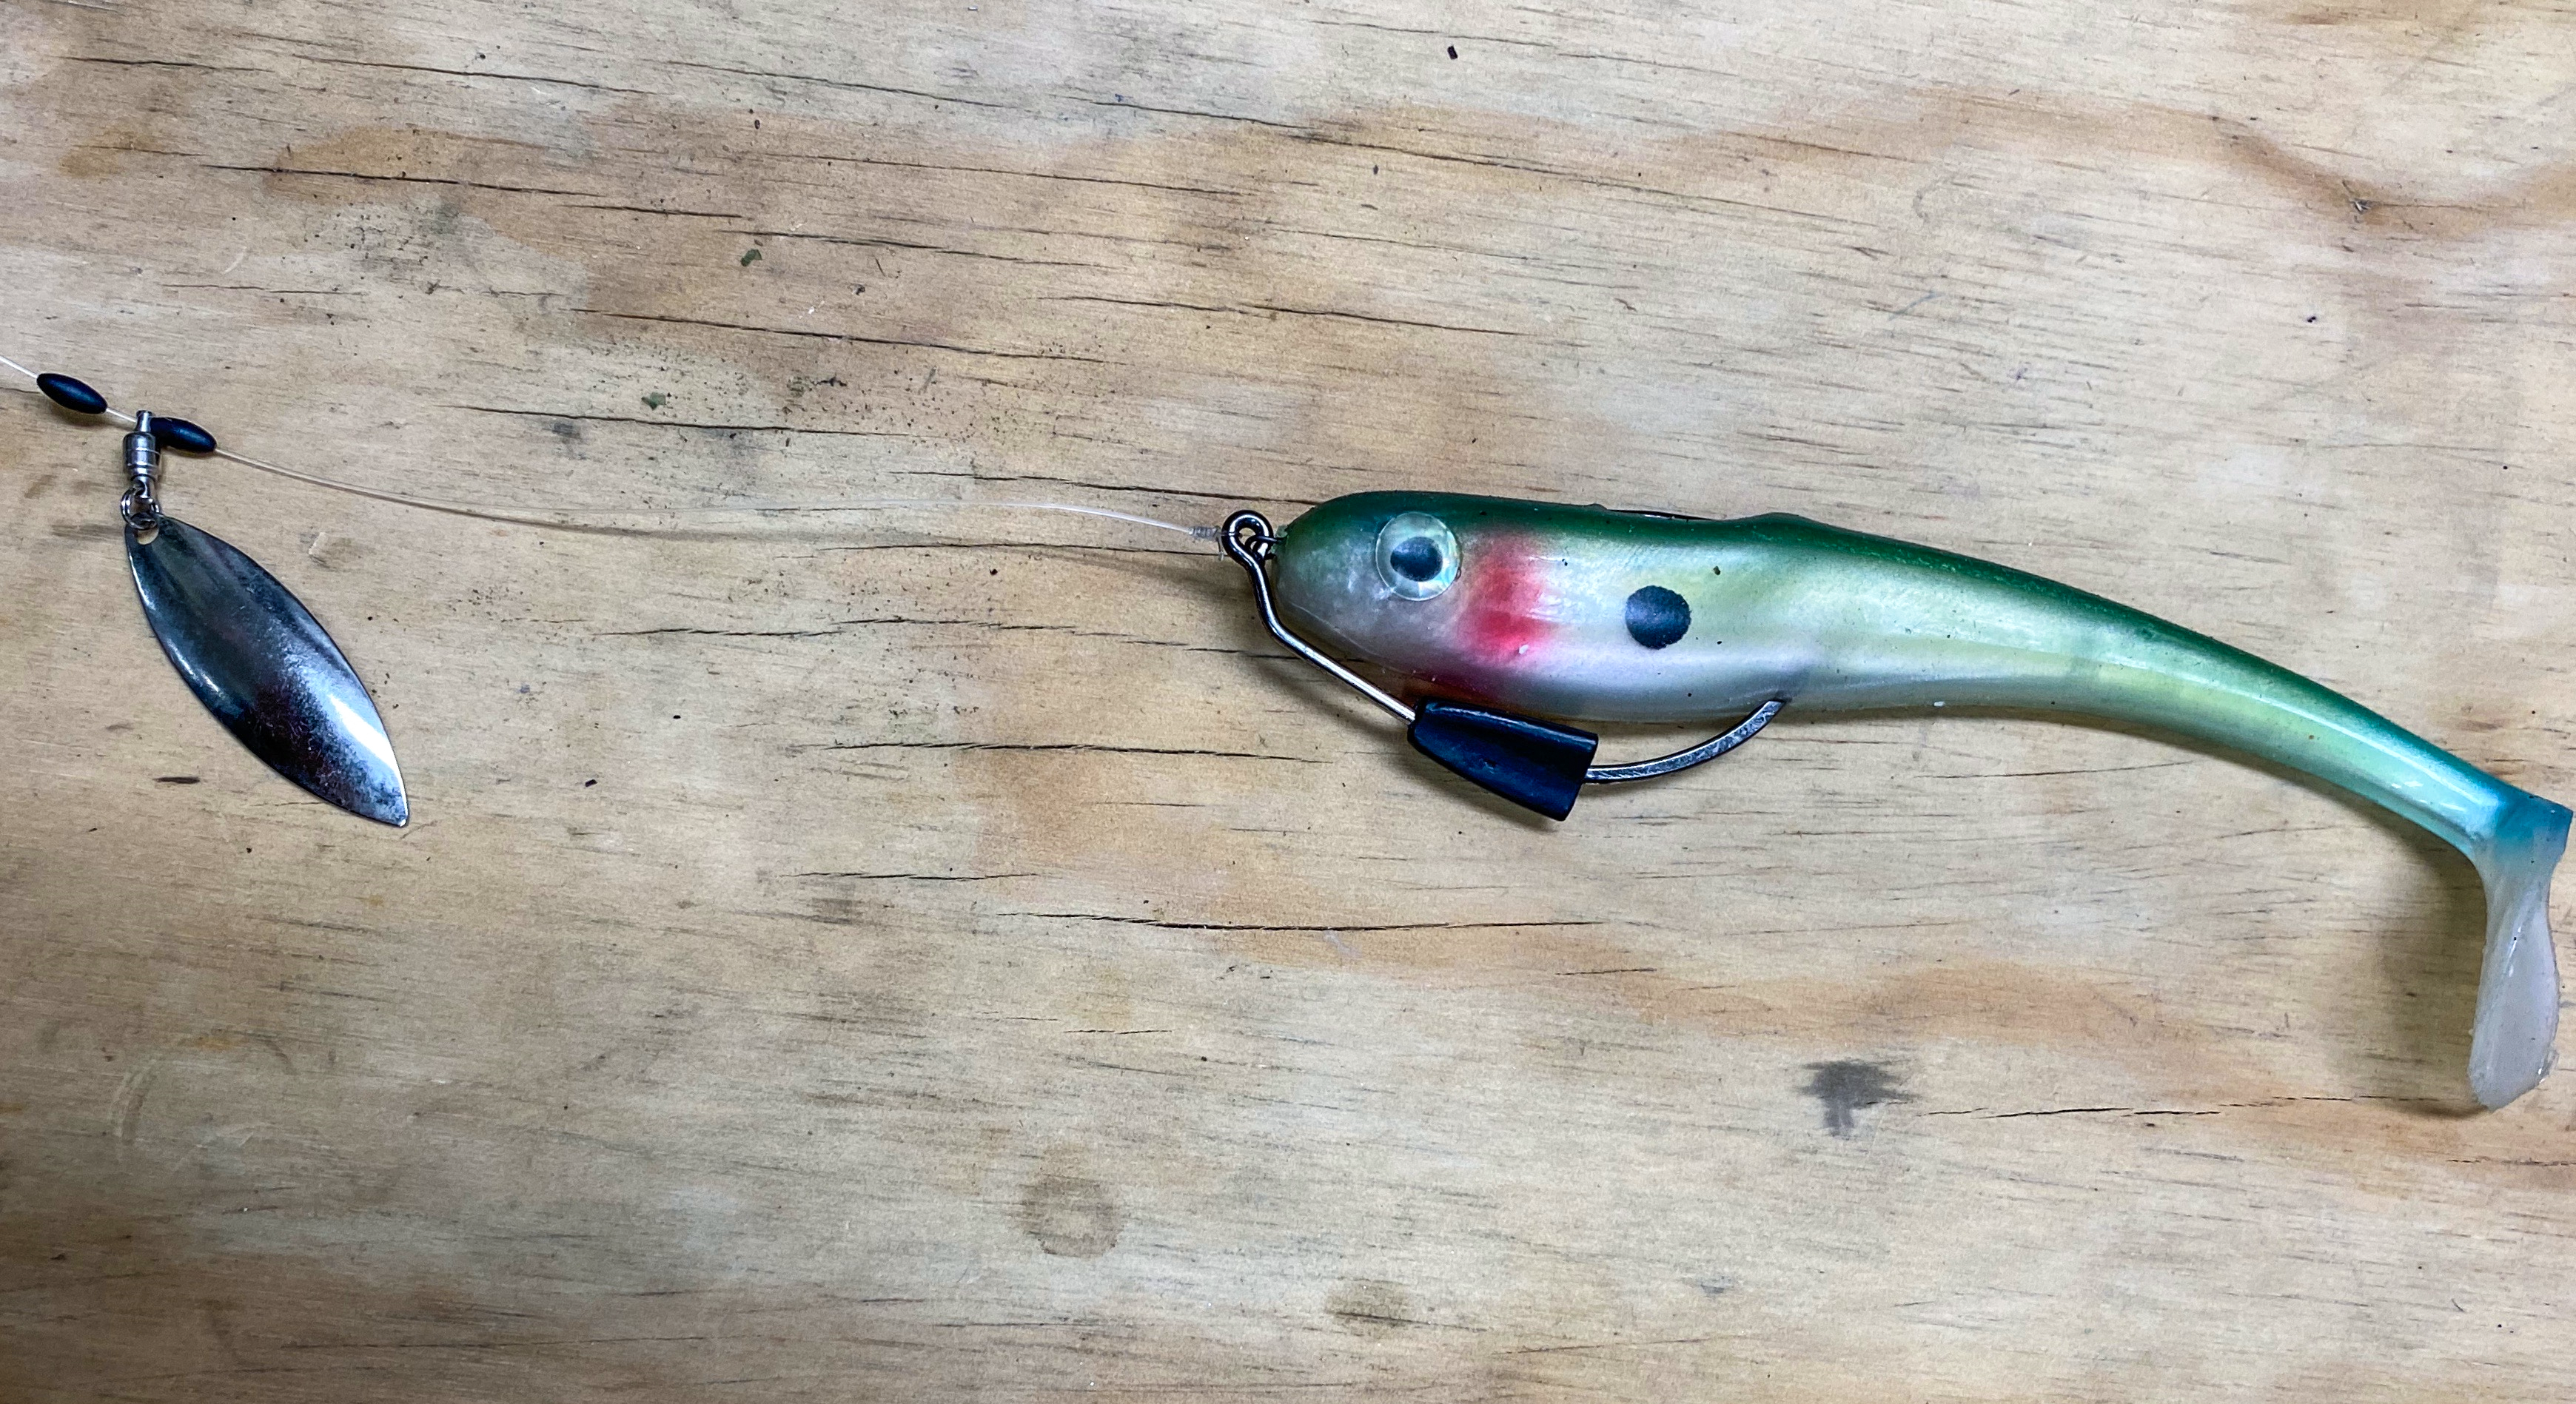 https://majorleaguefishing.com/wp-content/uploads/2020/01/Iaconelli-bait-chaser-rig.png